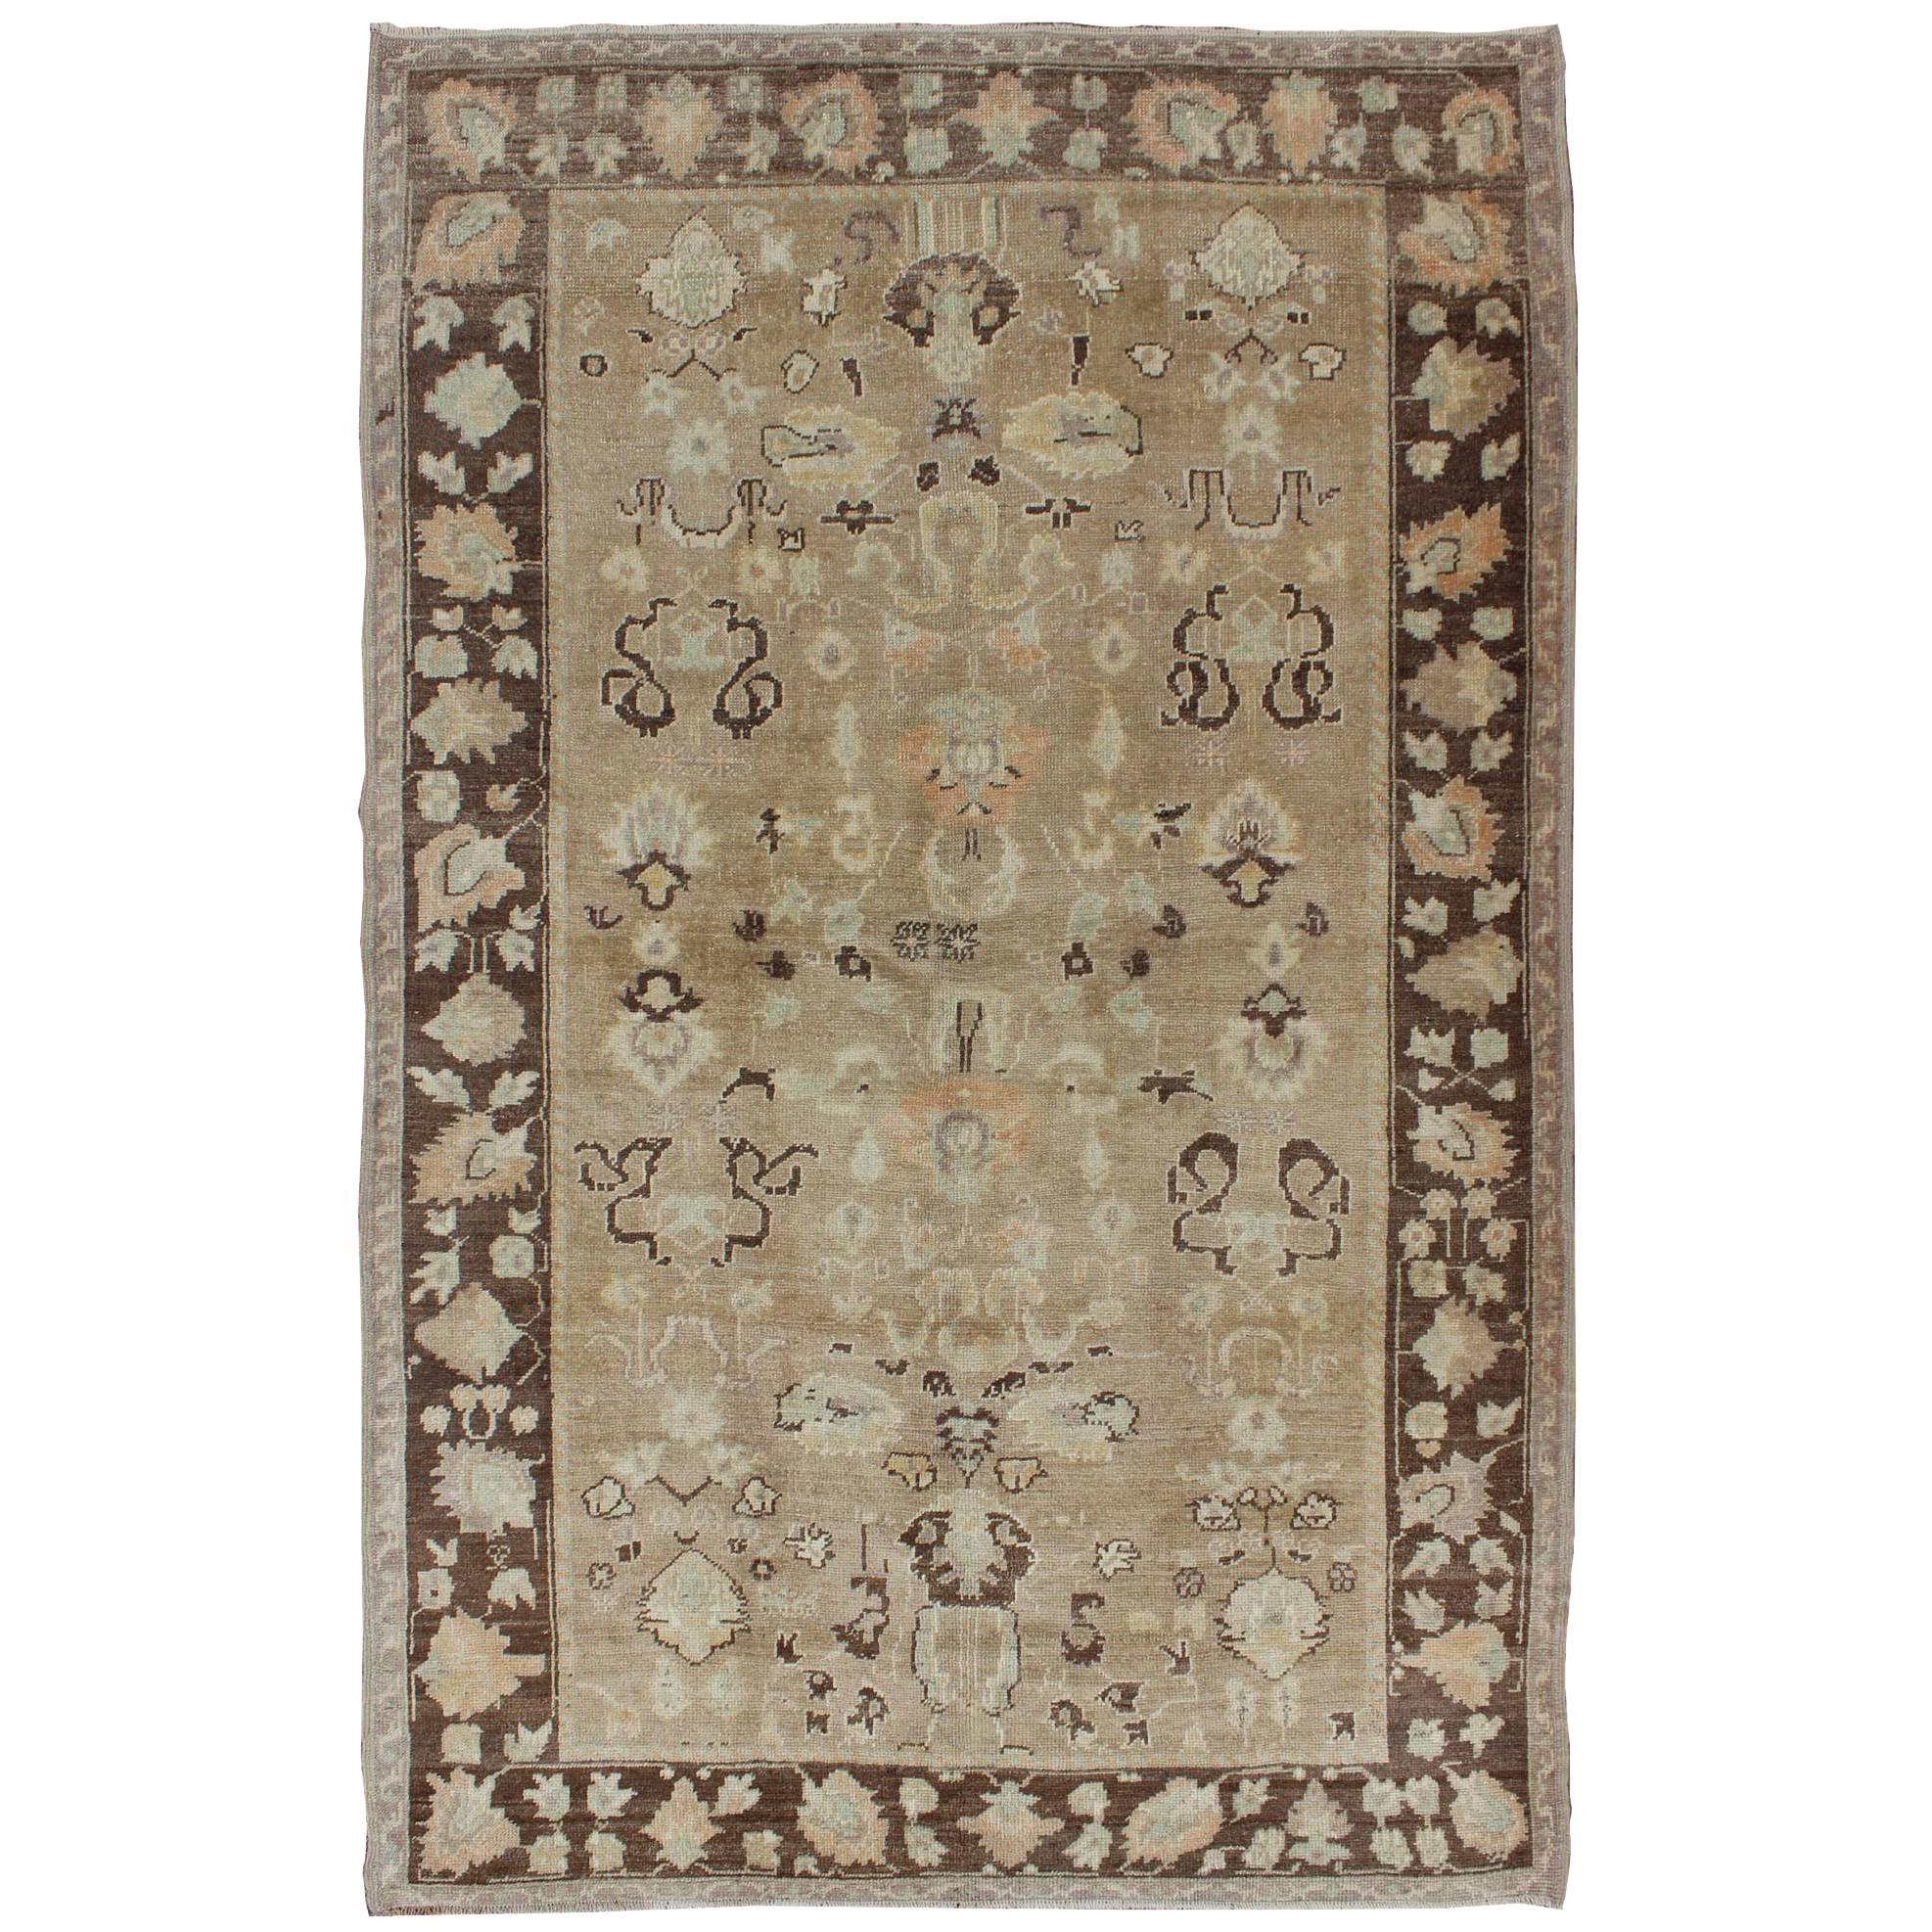 Vintage Turkish Oushak Rug with Floral Design in Chocolate Brown and Taupe